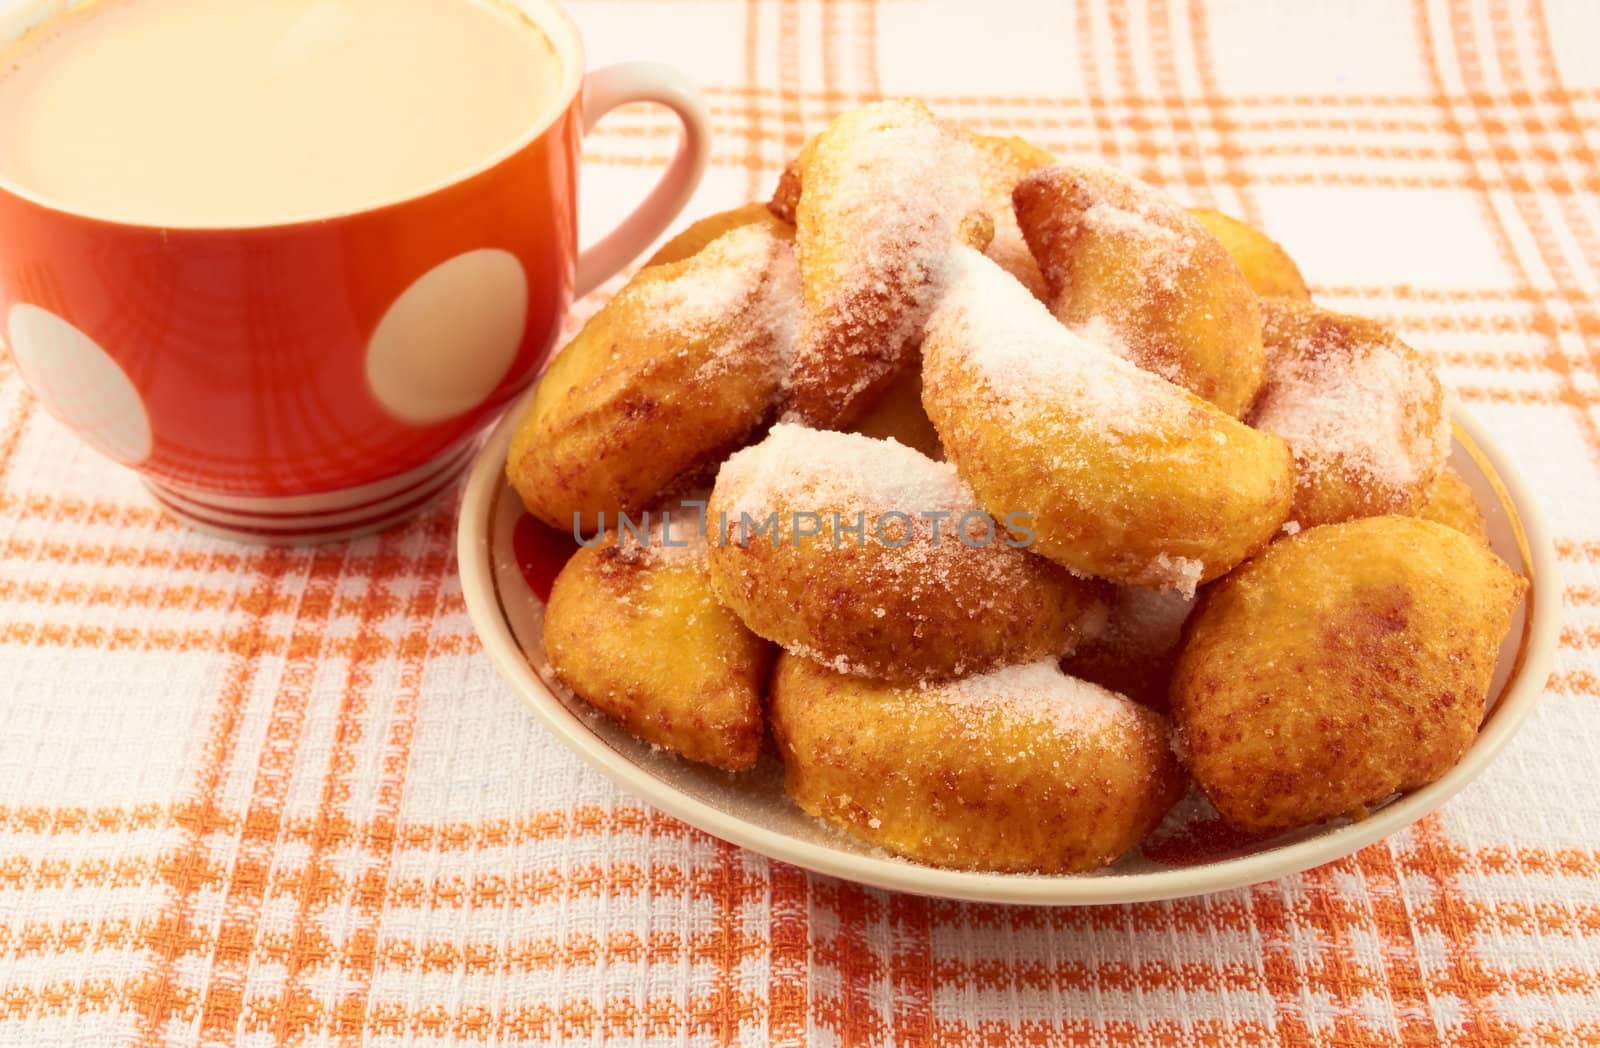  Sweet cheese donuts sprinkled with powdered sugar on a plate